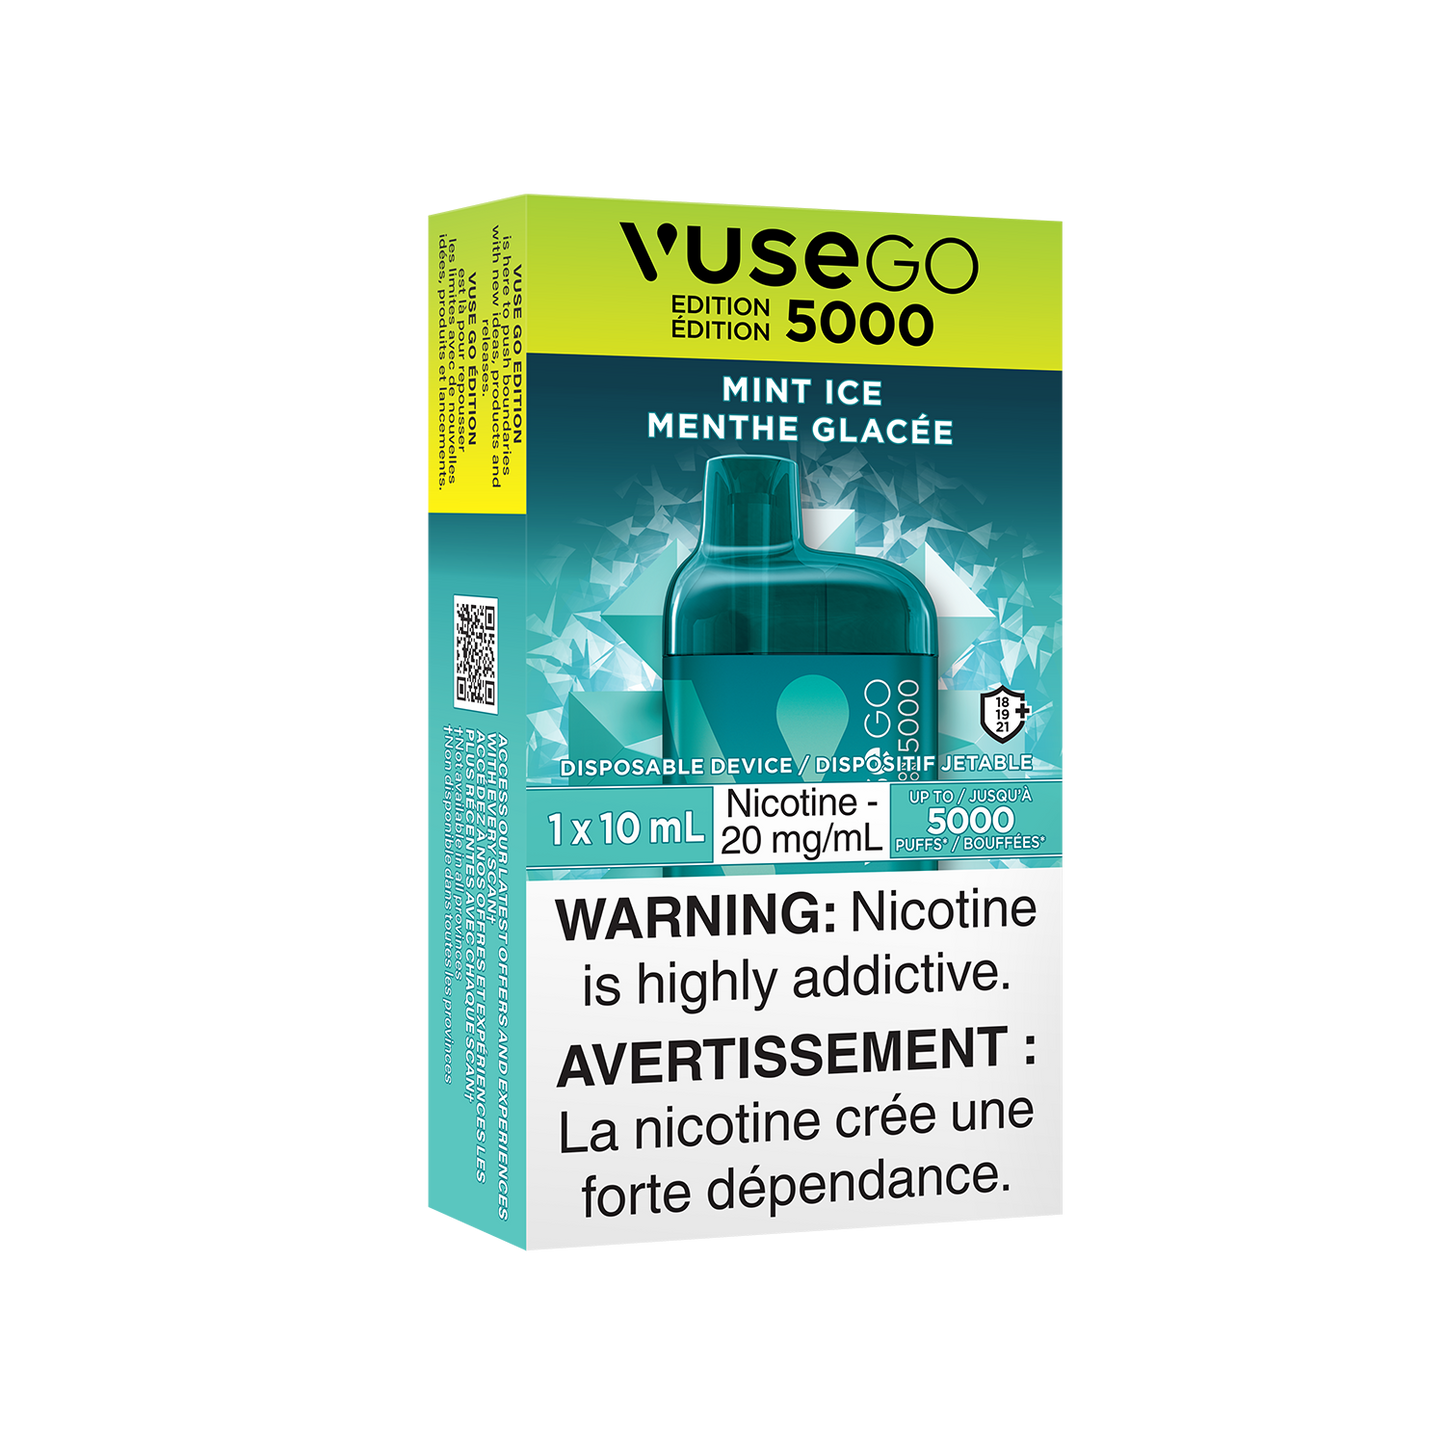 Vuse Go 5000 Edition - Mint Ice, 5000 Puffs